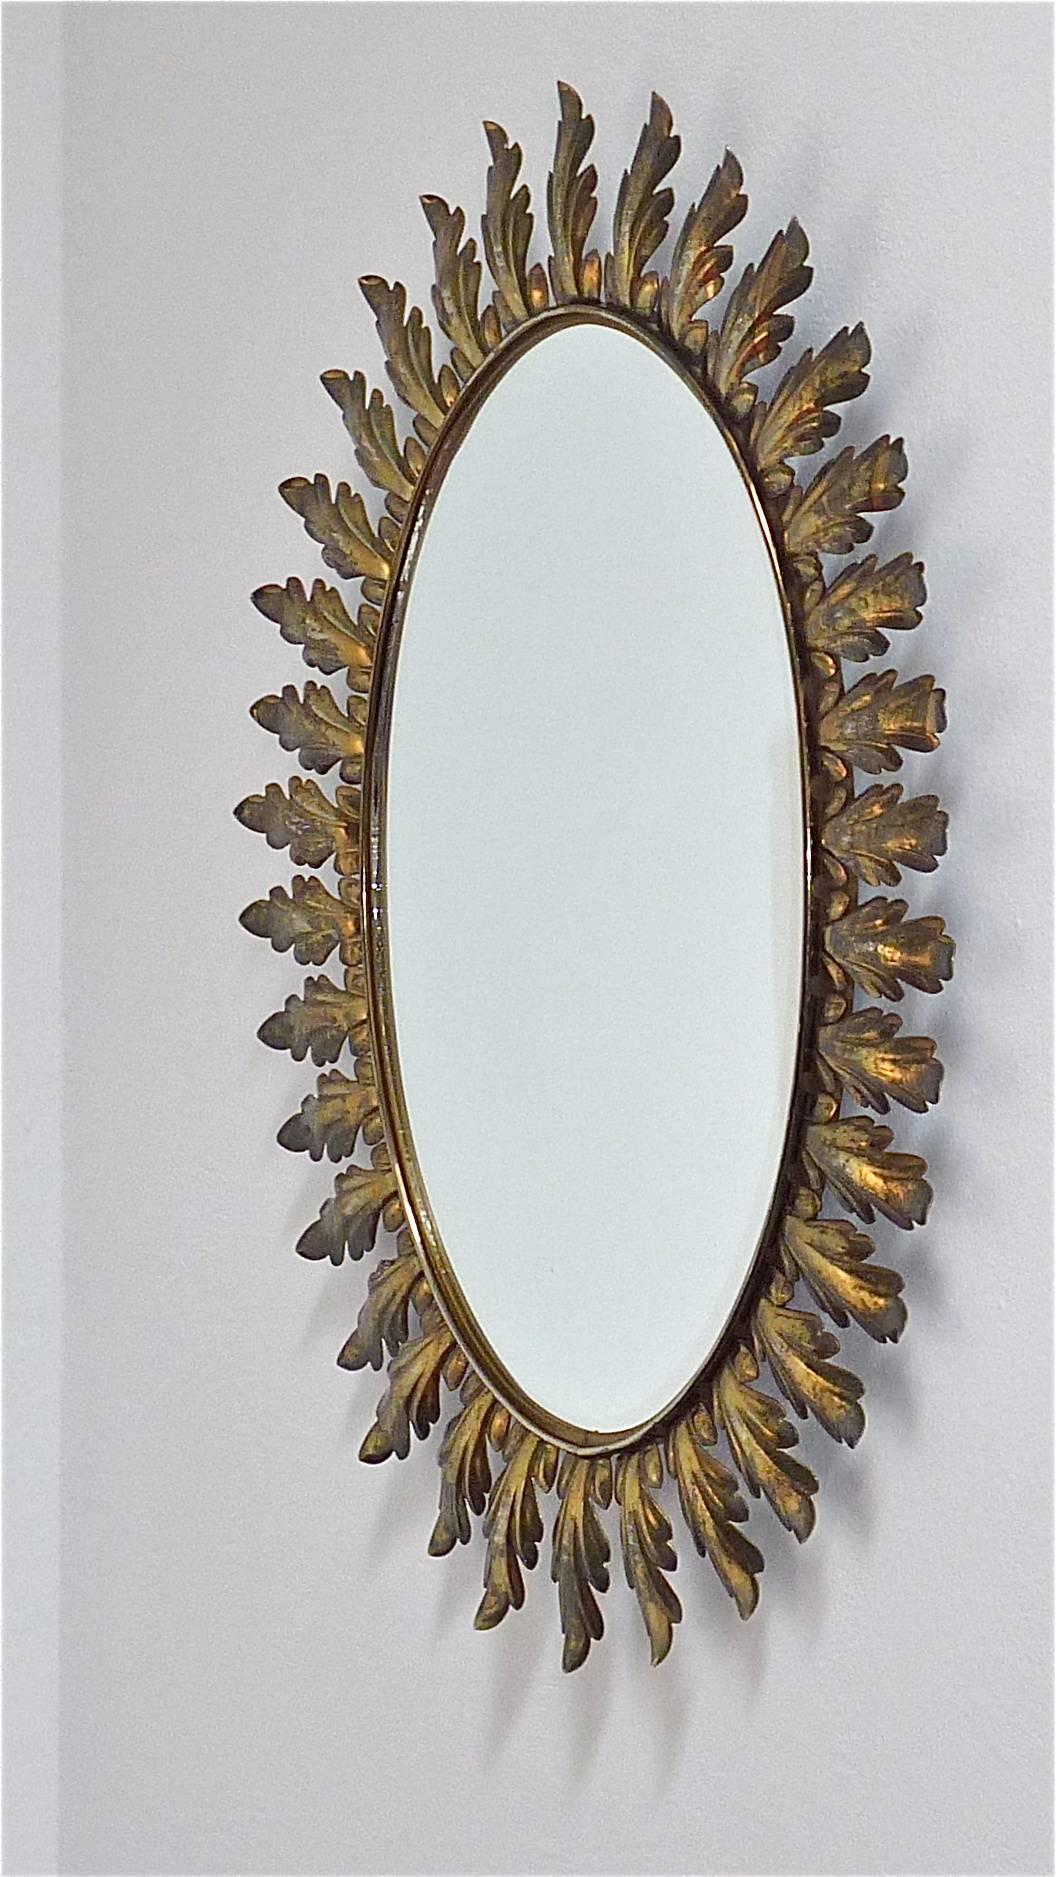 Large Midcentury Wall Mirror Patinated Brass Oval Floral Leaf Sunburst 1950s 1